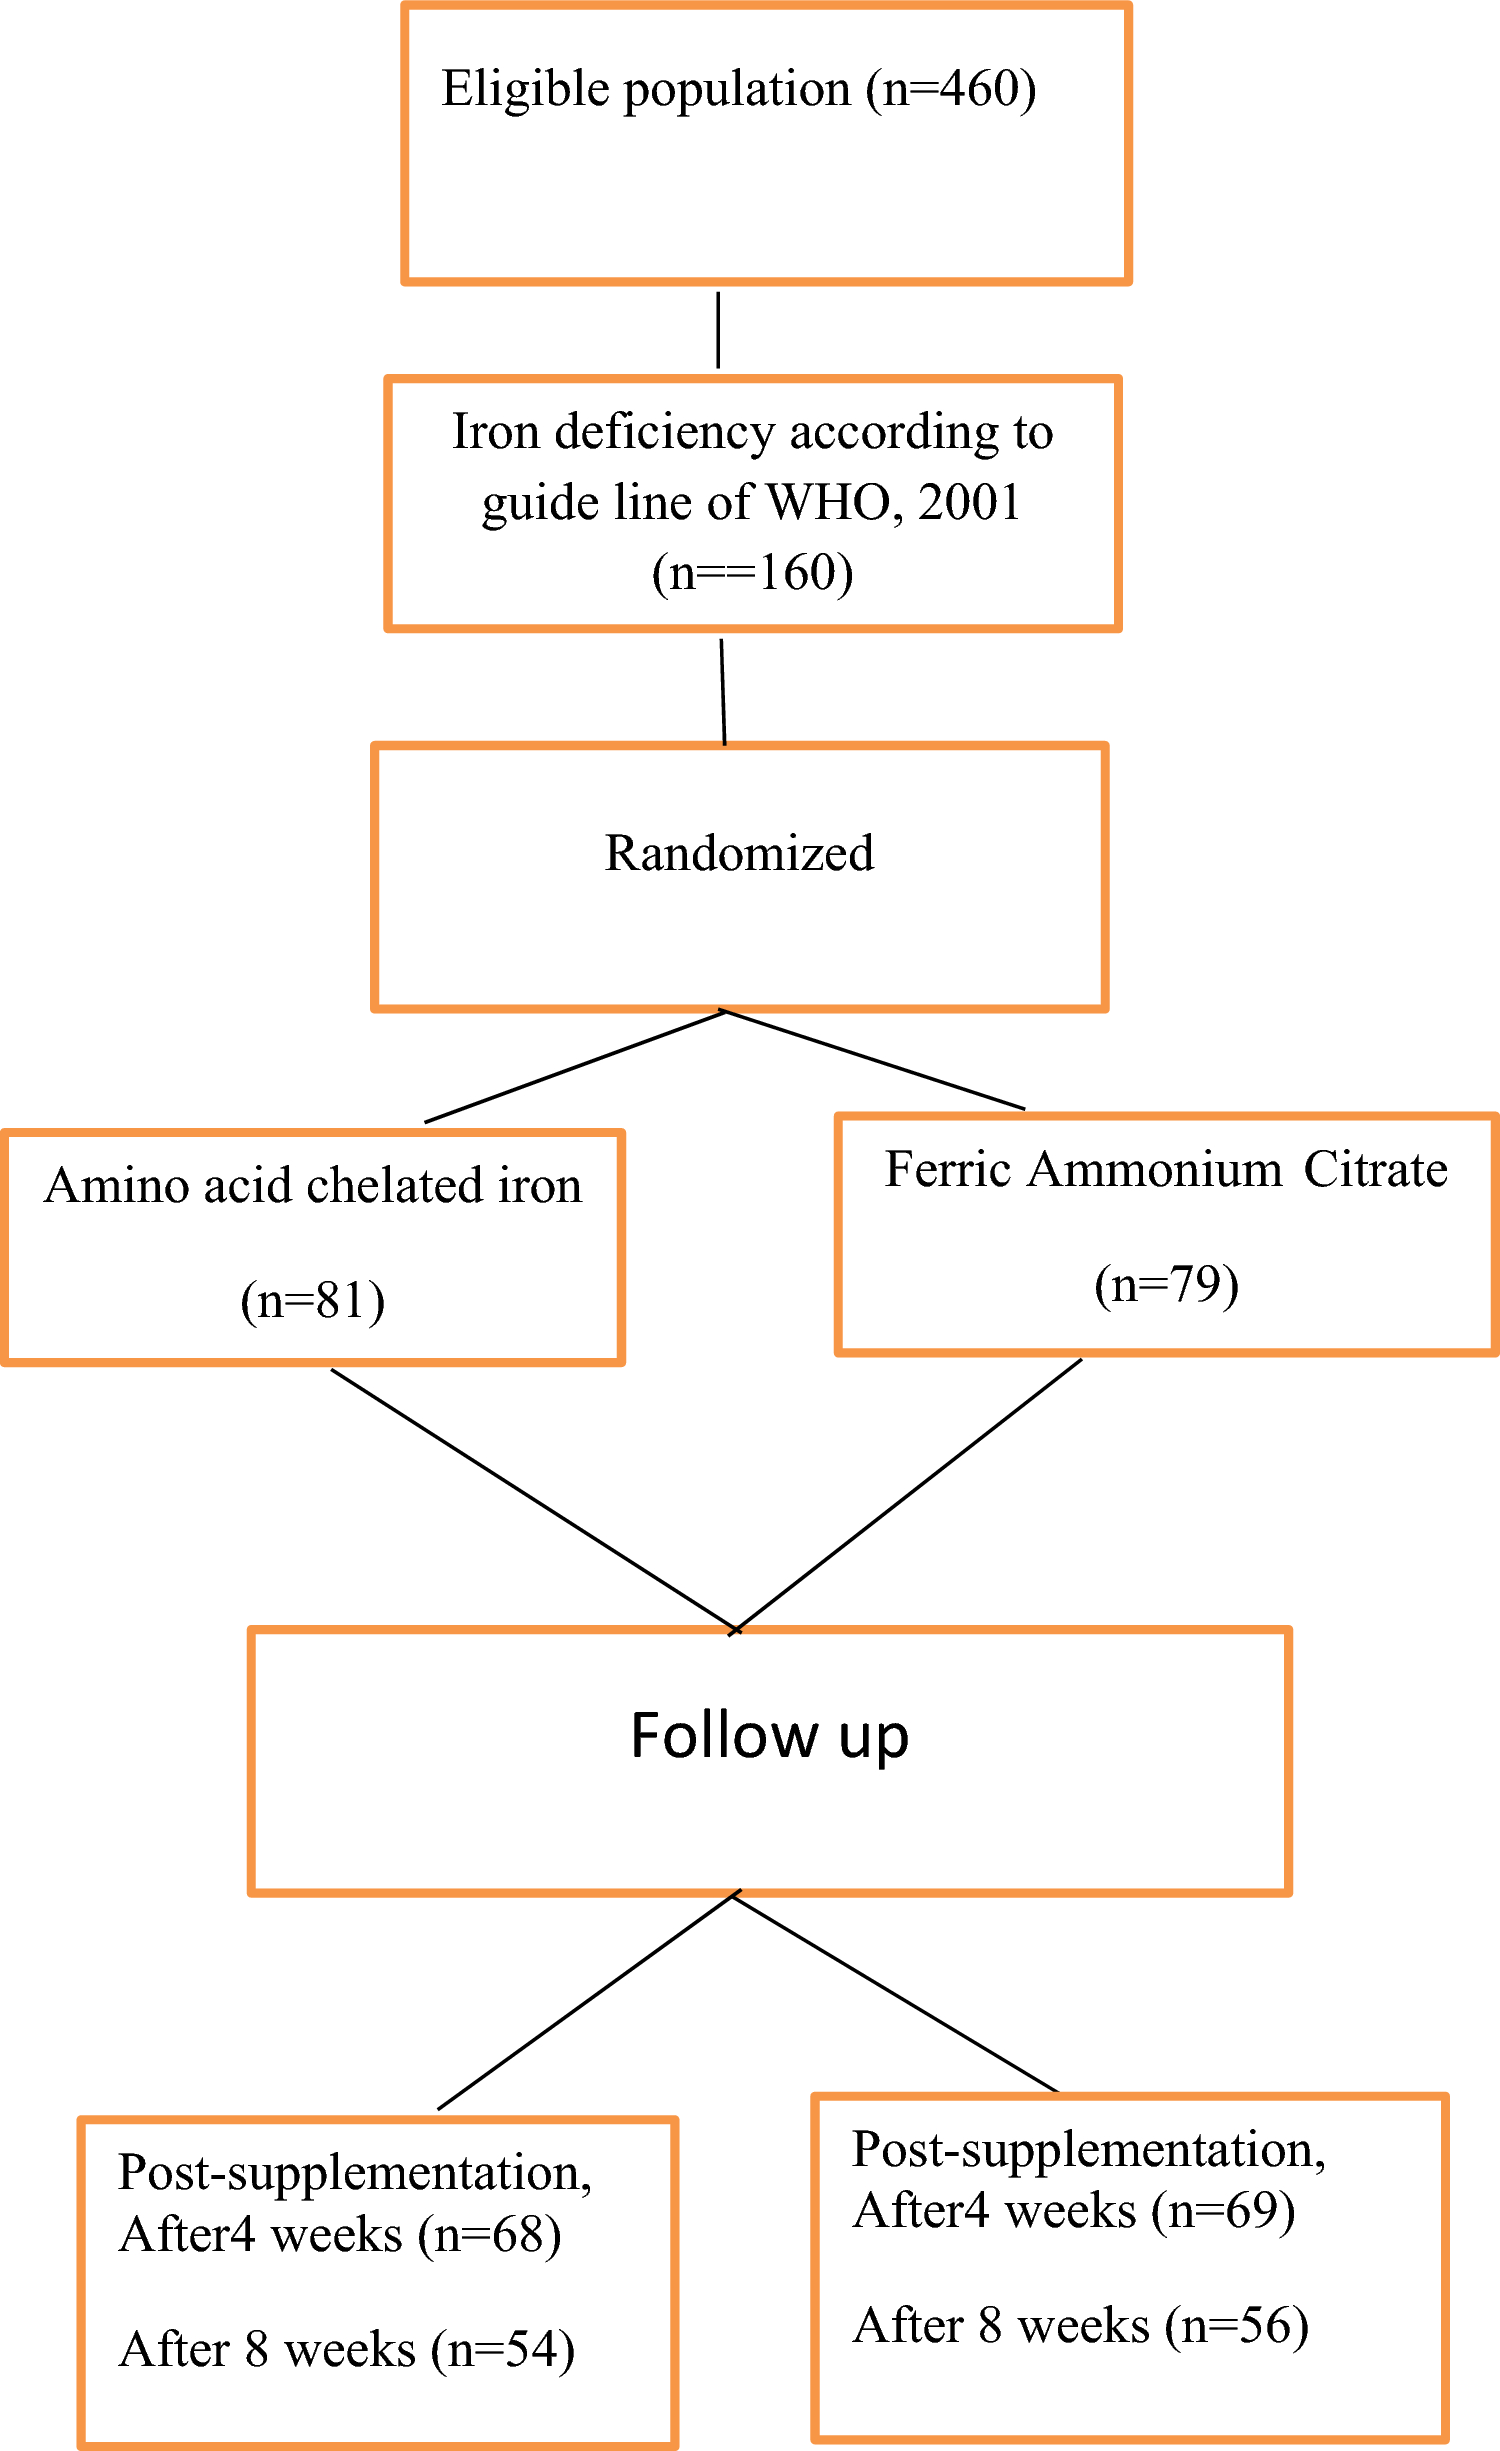 Amino Acid Chelated Iron Versus Ferric Ammonium Citrate on Iron Status in Egyptian Children with Iron Deficiency Anemia: A Randomized Controlled Study